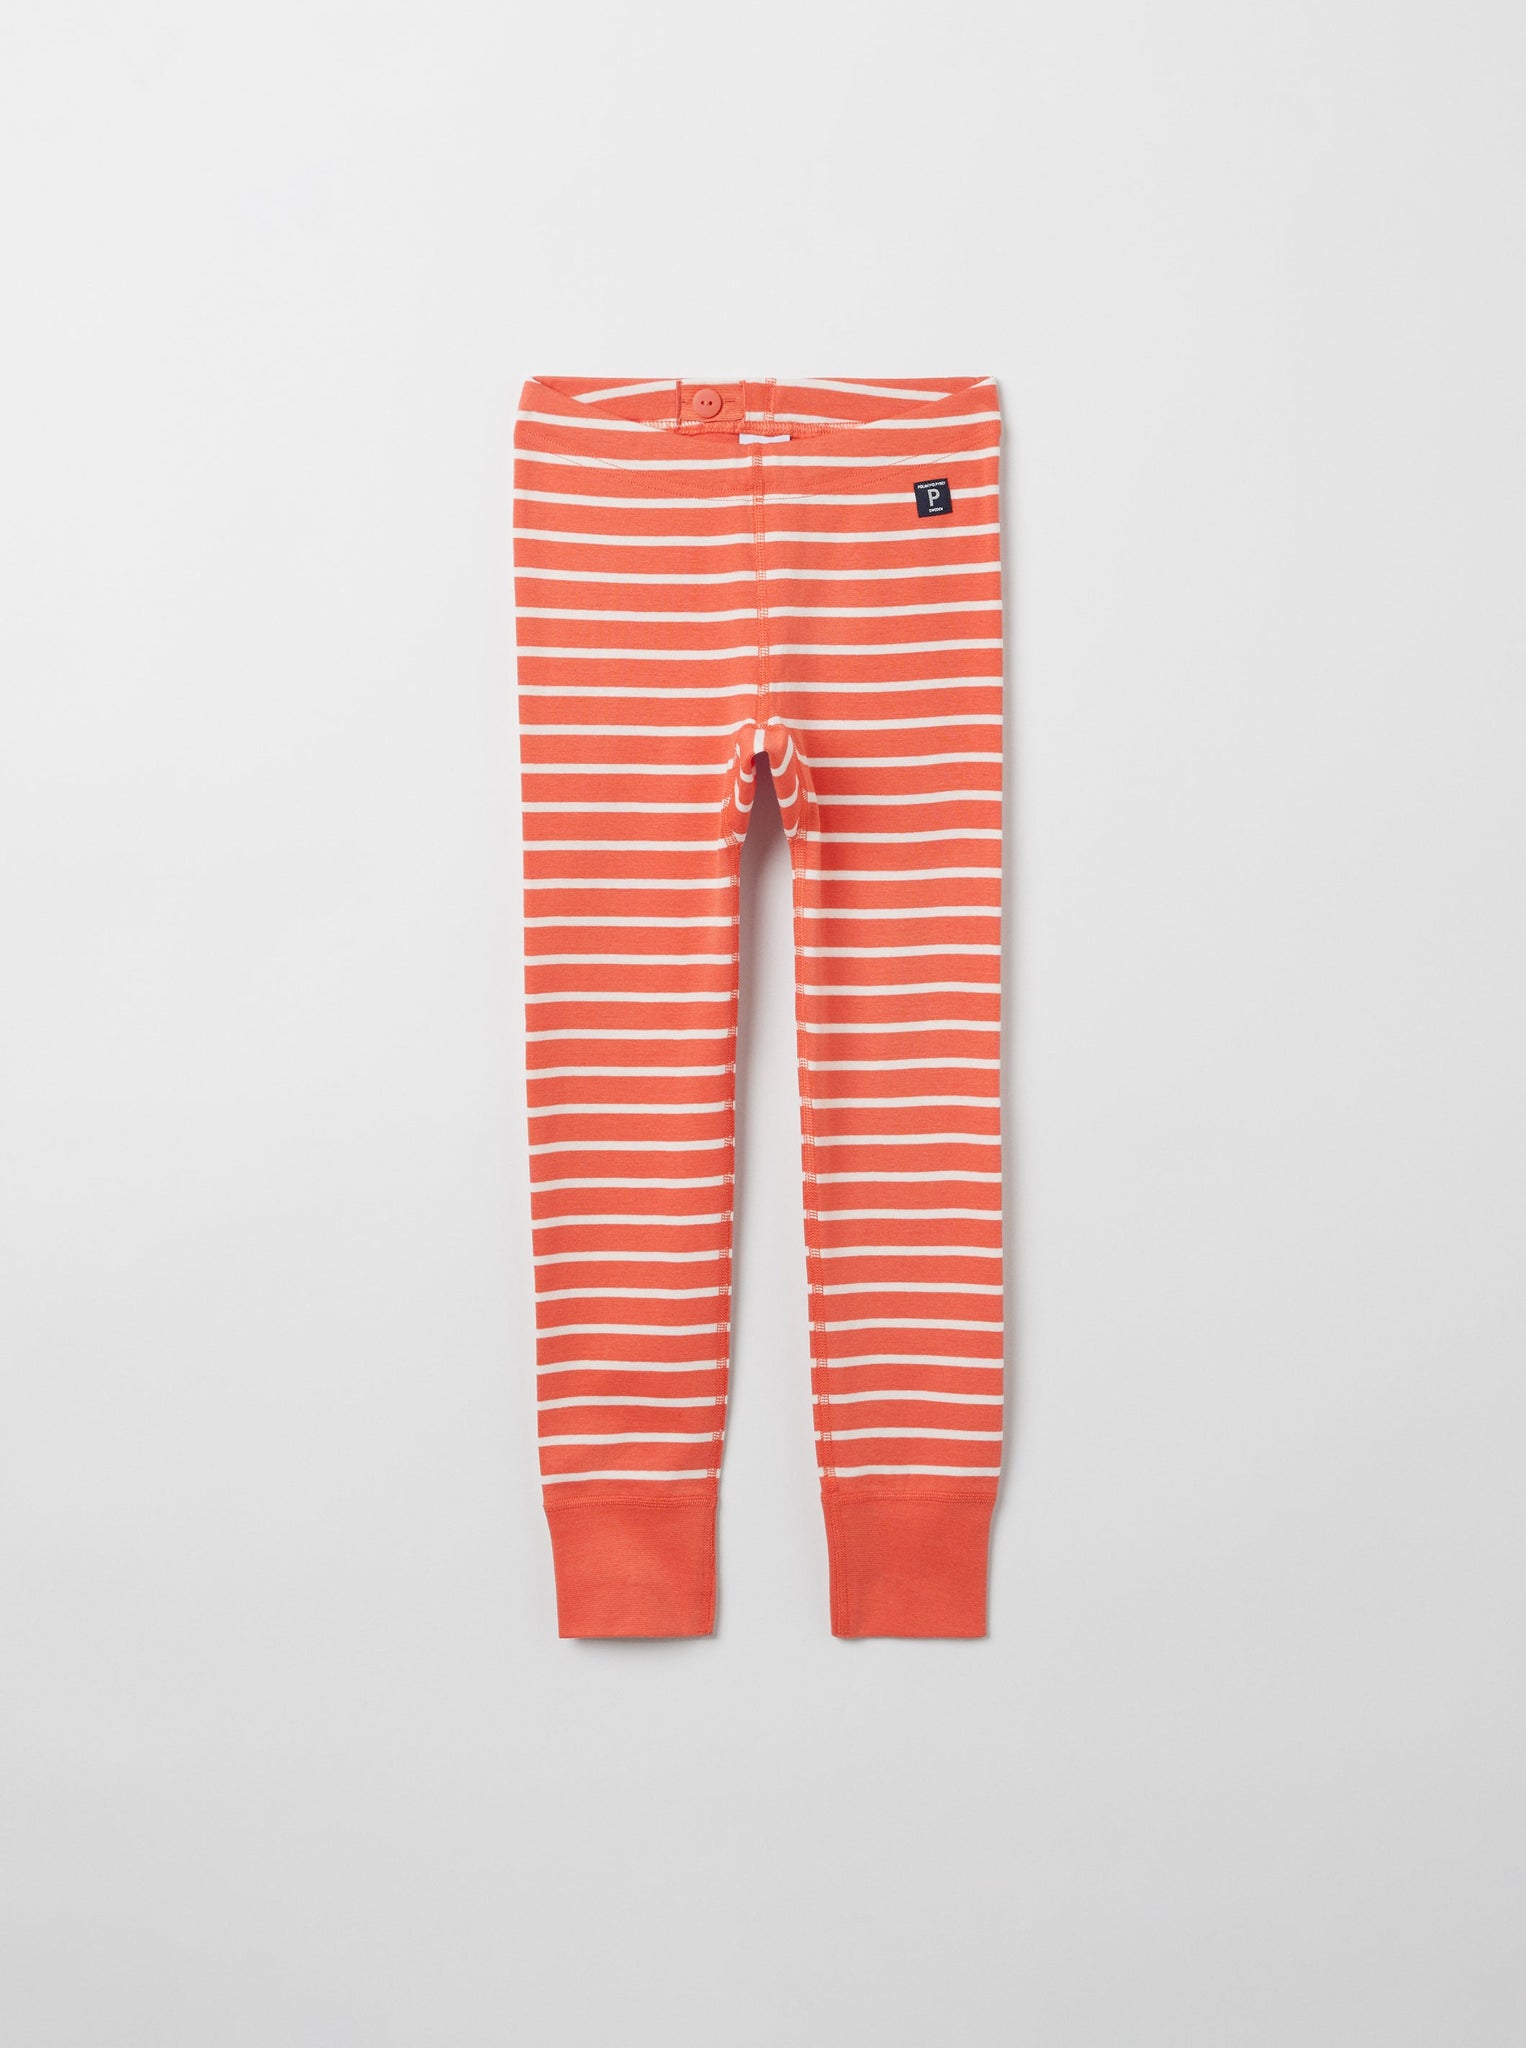 Organic Cotton Orange Kids Leggings from the Polarn O. Pyret kidswear collection. Clothes made using sustainably sourced materials.